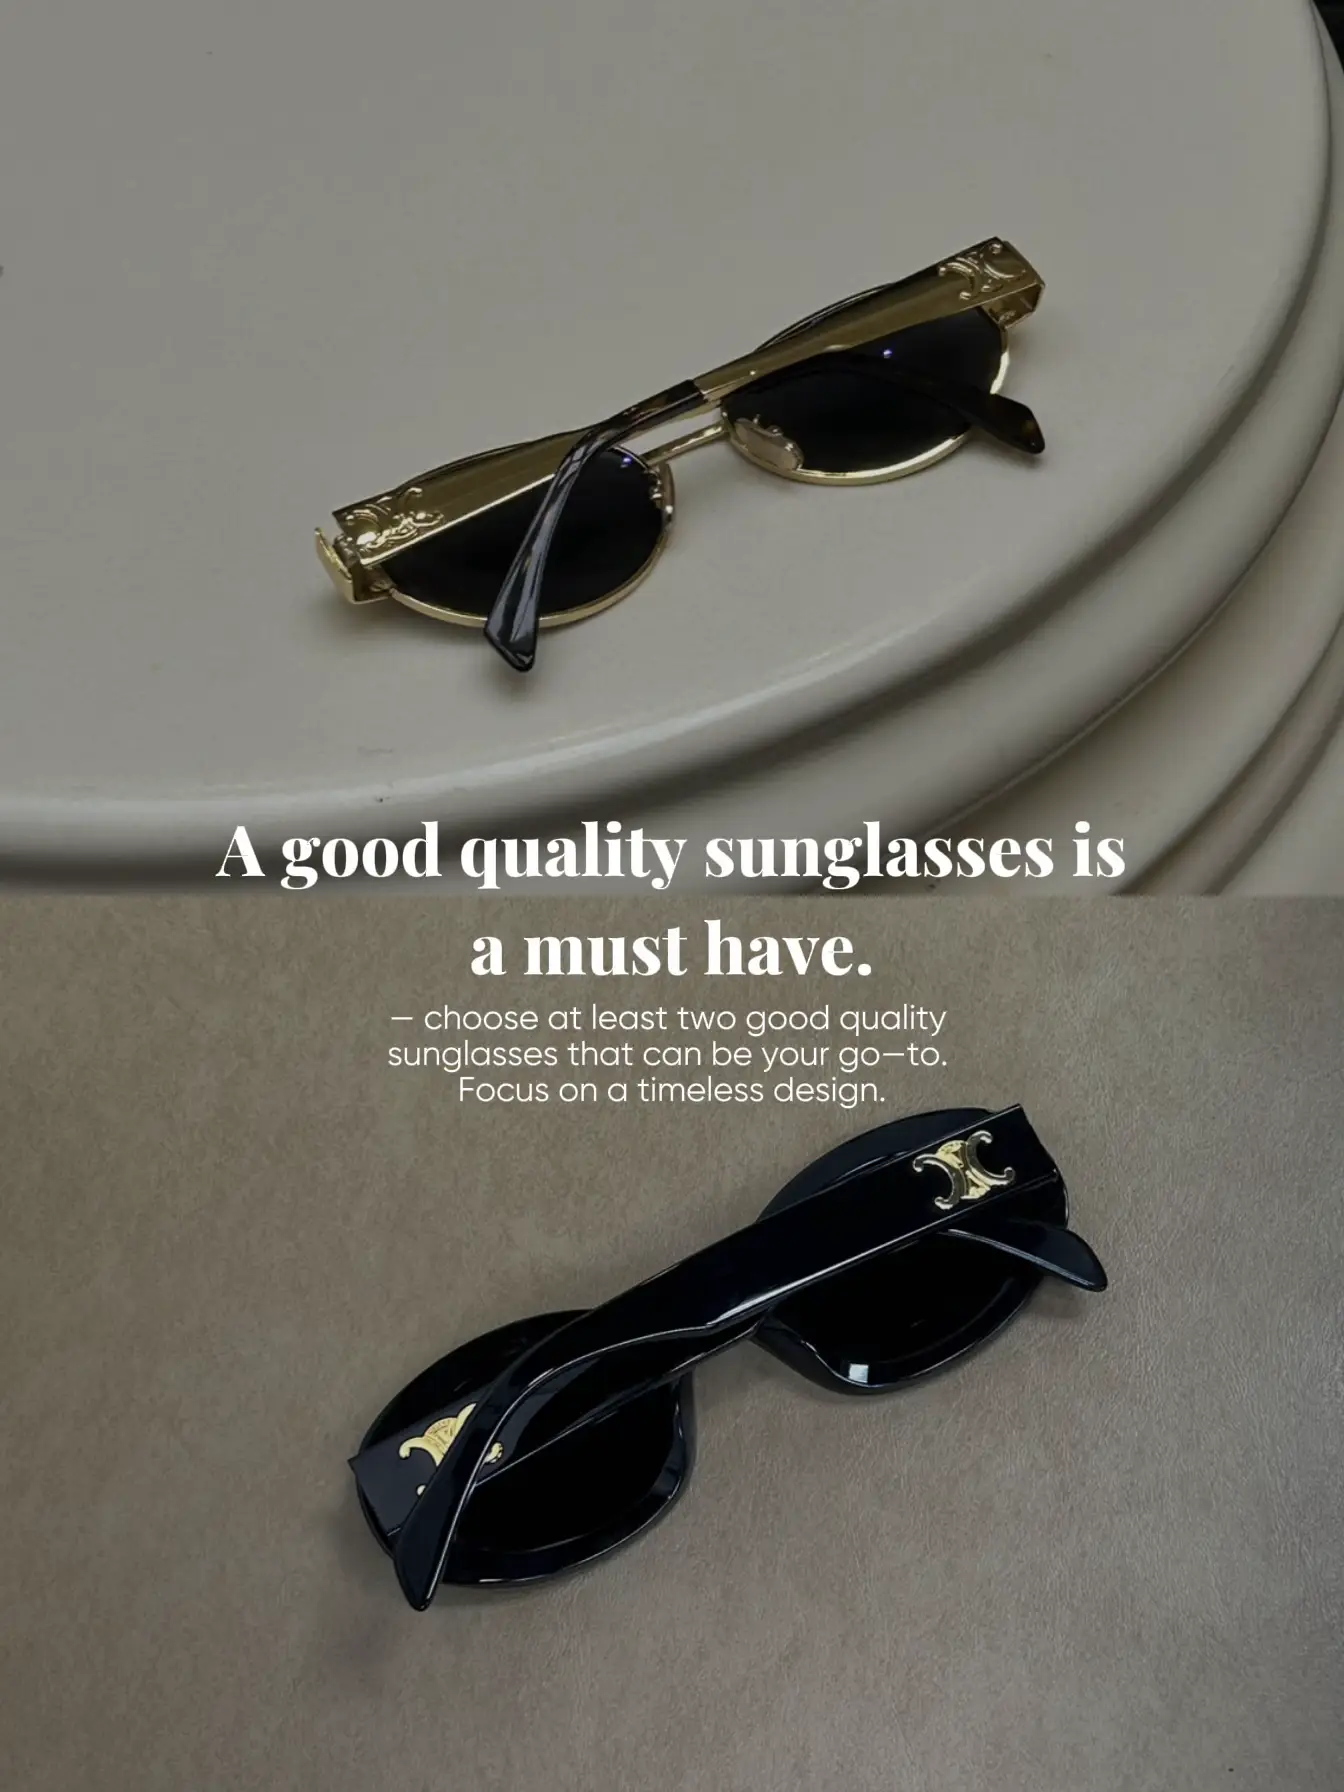  A pair of sunglasses is displayed on a white background.